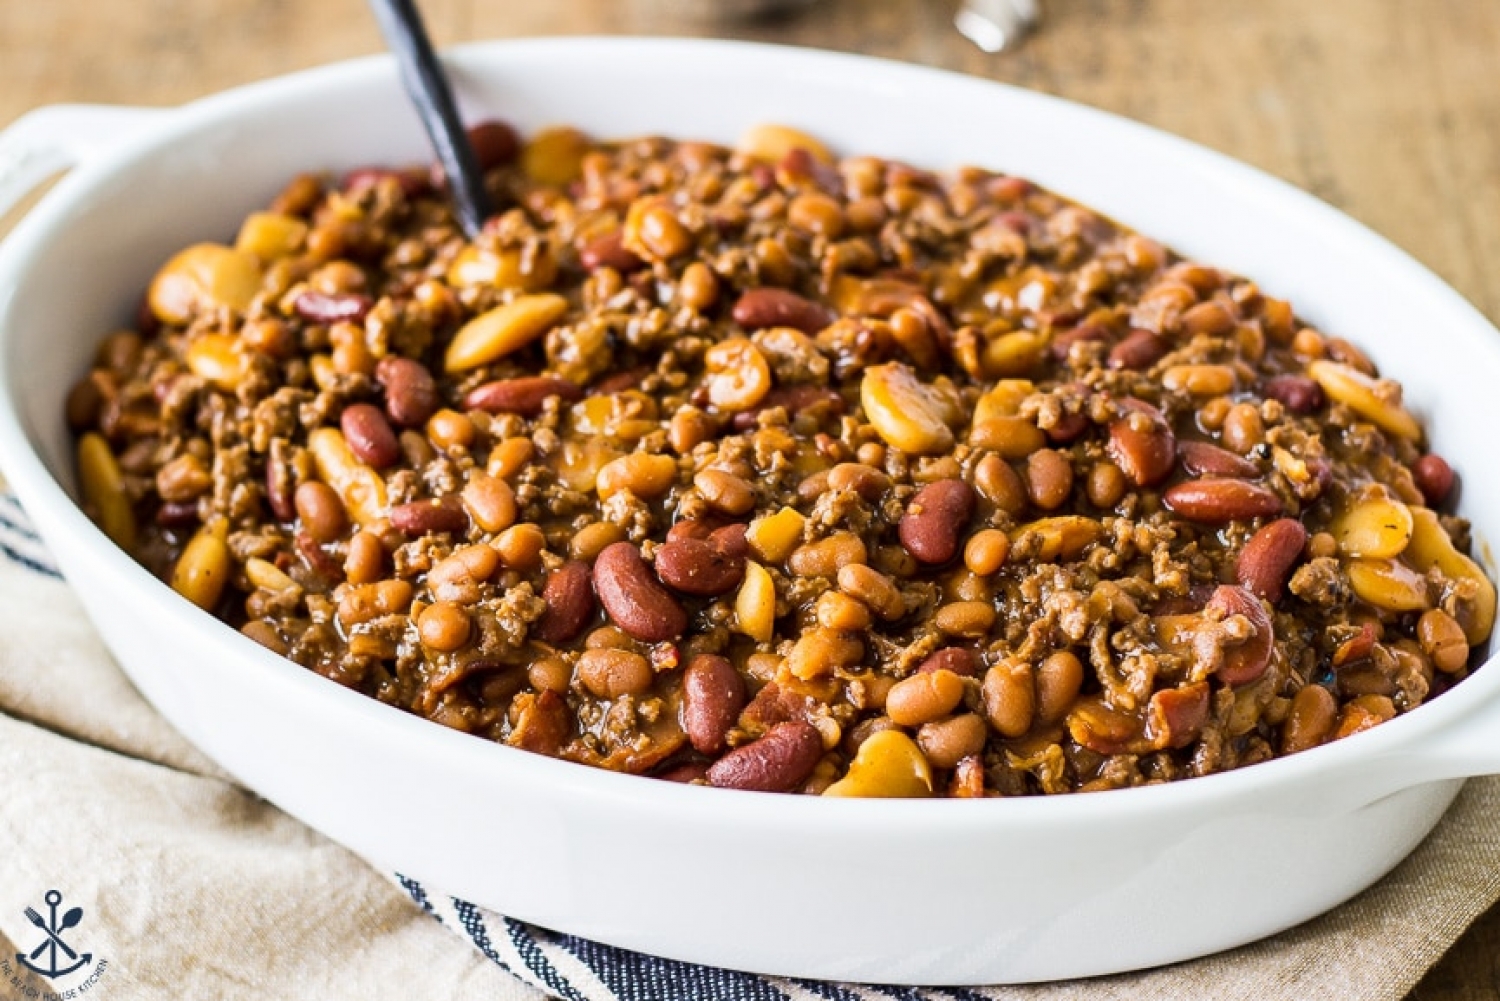 <p>Canned pork and beans, light red kidney beans and butter beans are the 3-bean base for this hearty bake that also has ground beef and bacon for good measure. All you have to do is pre-cook the meats, then dump everything in a pot and into the oven it goes! <a href="https://thebeachhousekitchen.com/baked-three-bean-casserole/" rel="noopener">Get the recipe here.</a></p>